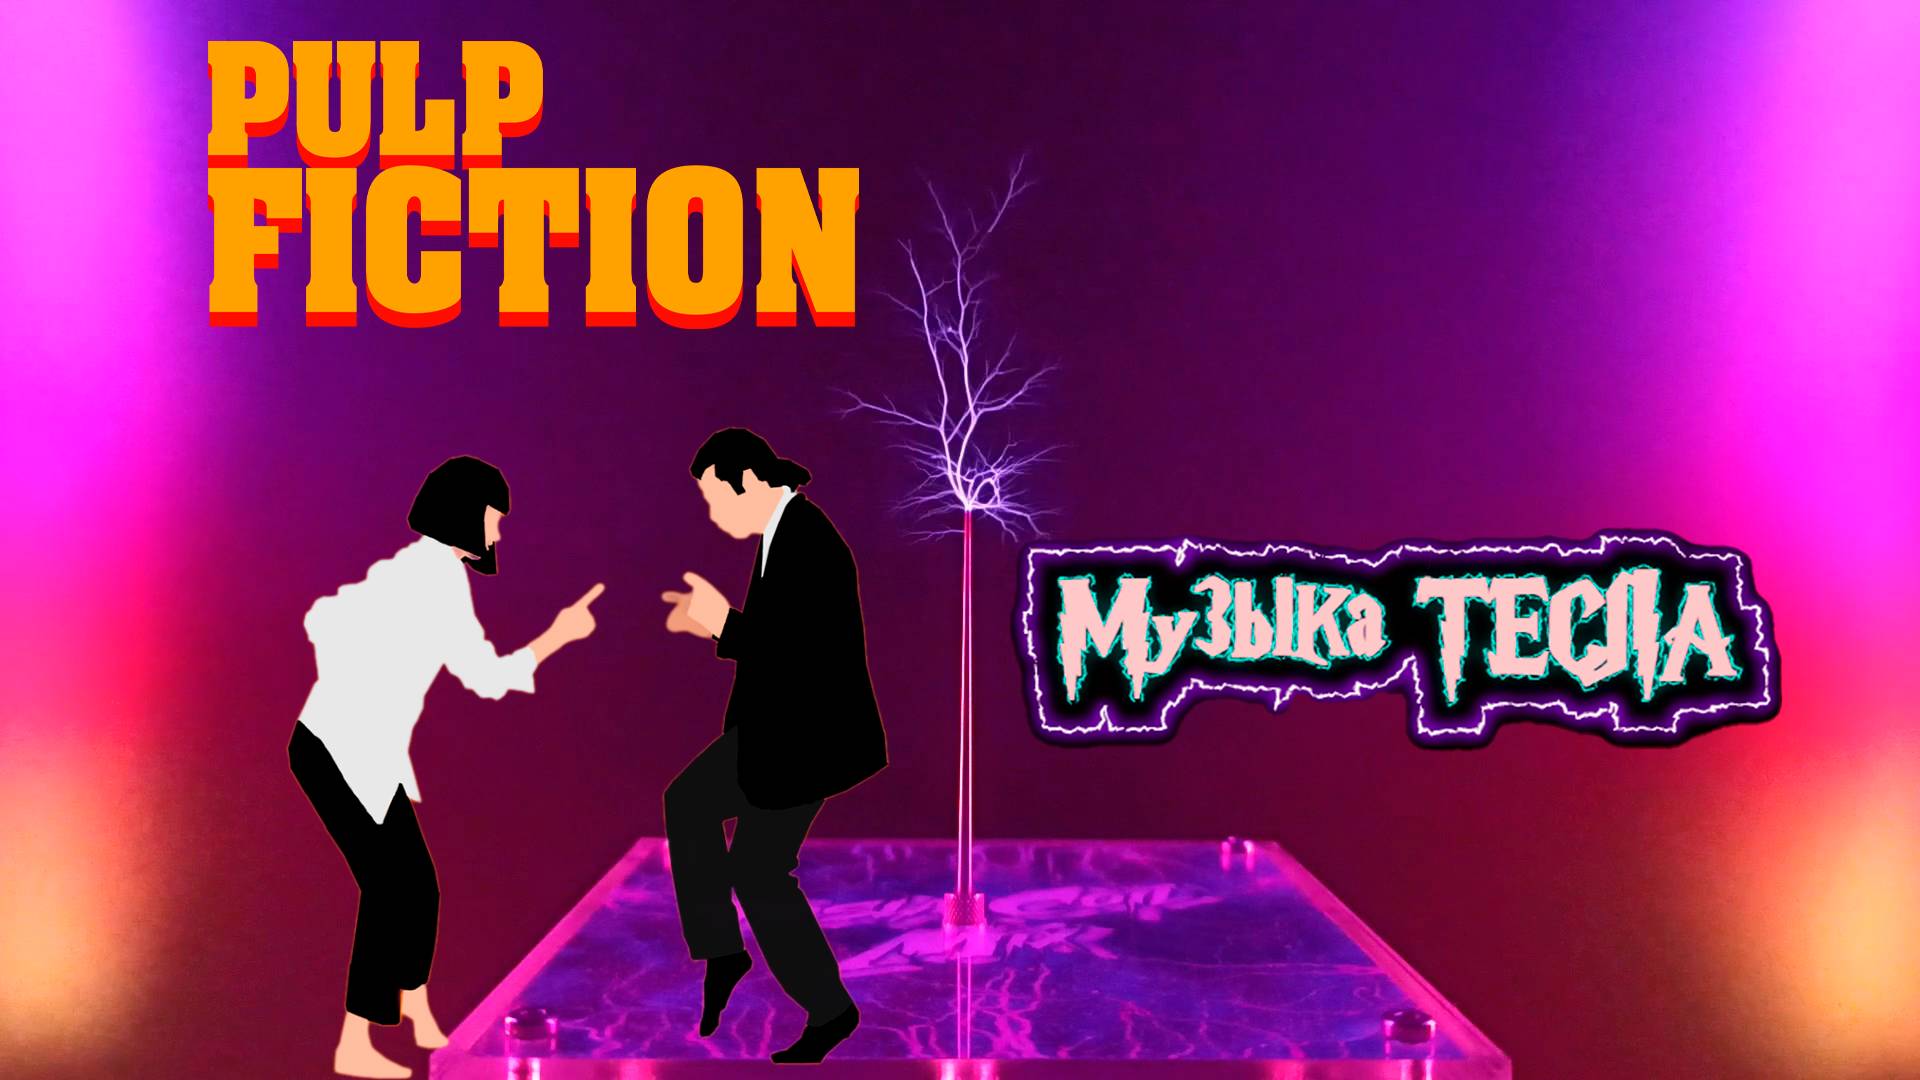 You Never Can Tell from Pulp Fiction Tesla Coil Mix #музыкатесла